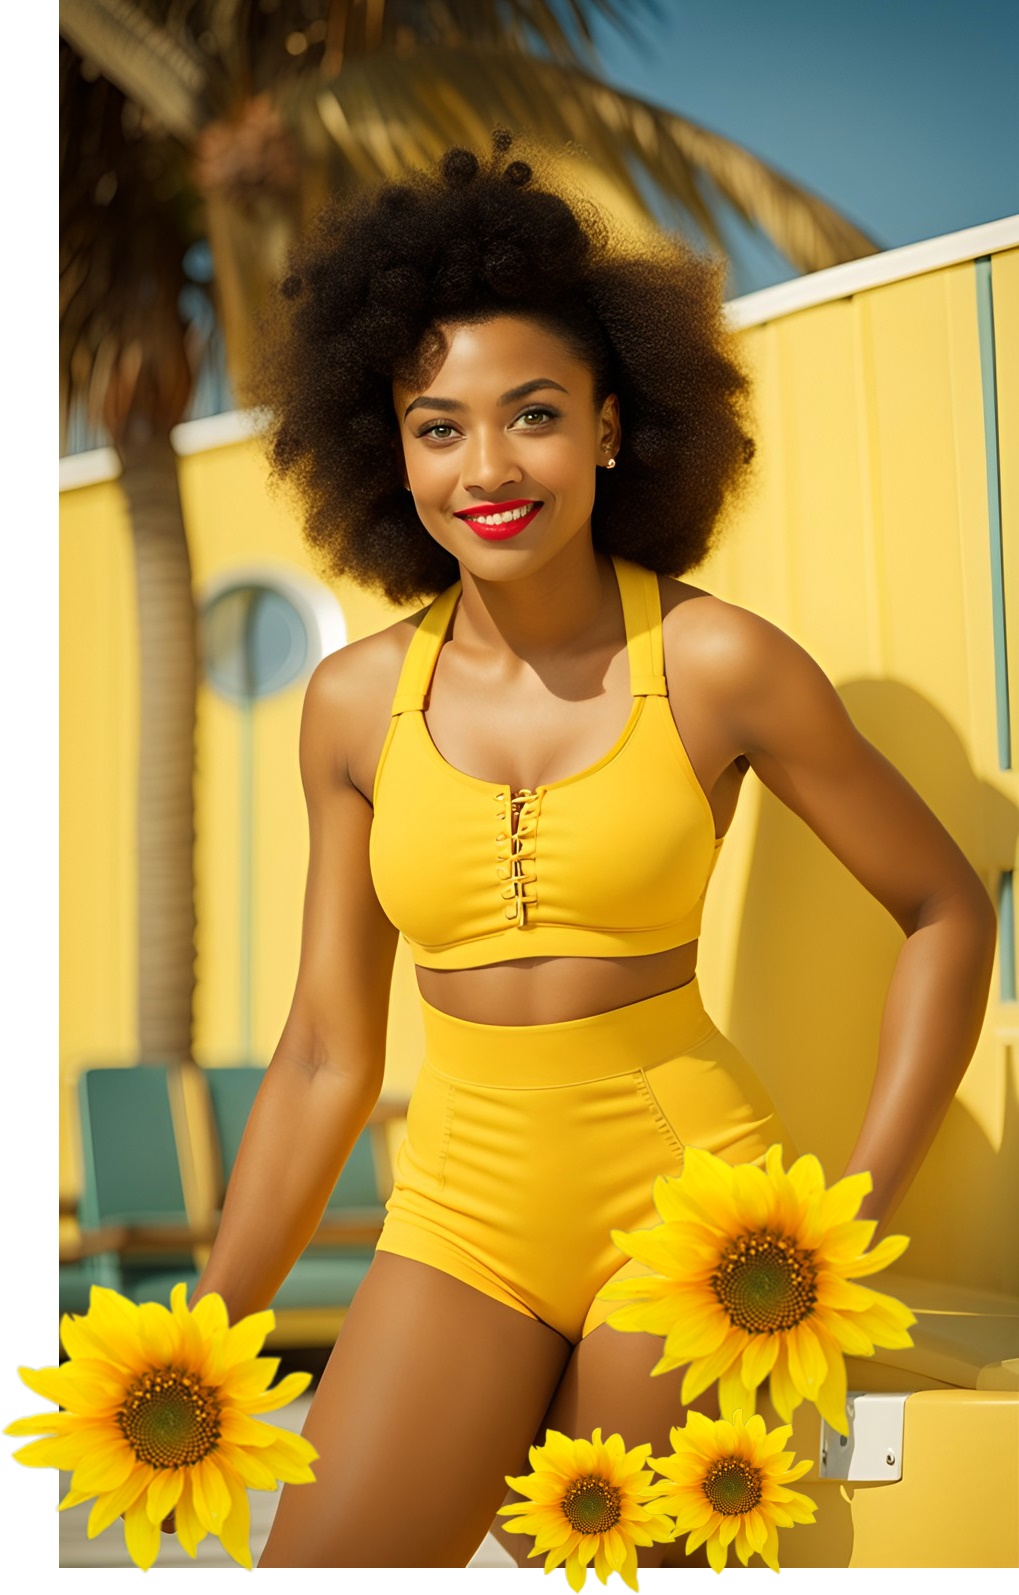 Mixed-race models pose in yellow sports outfit Dream140